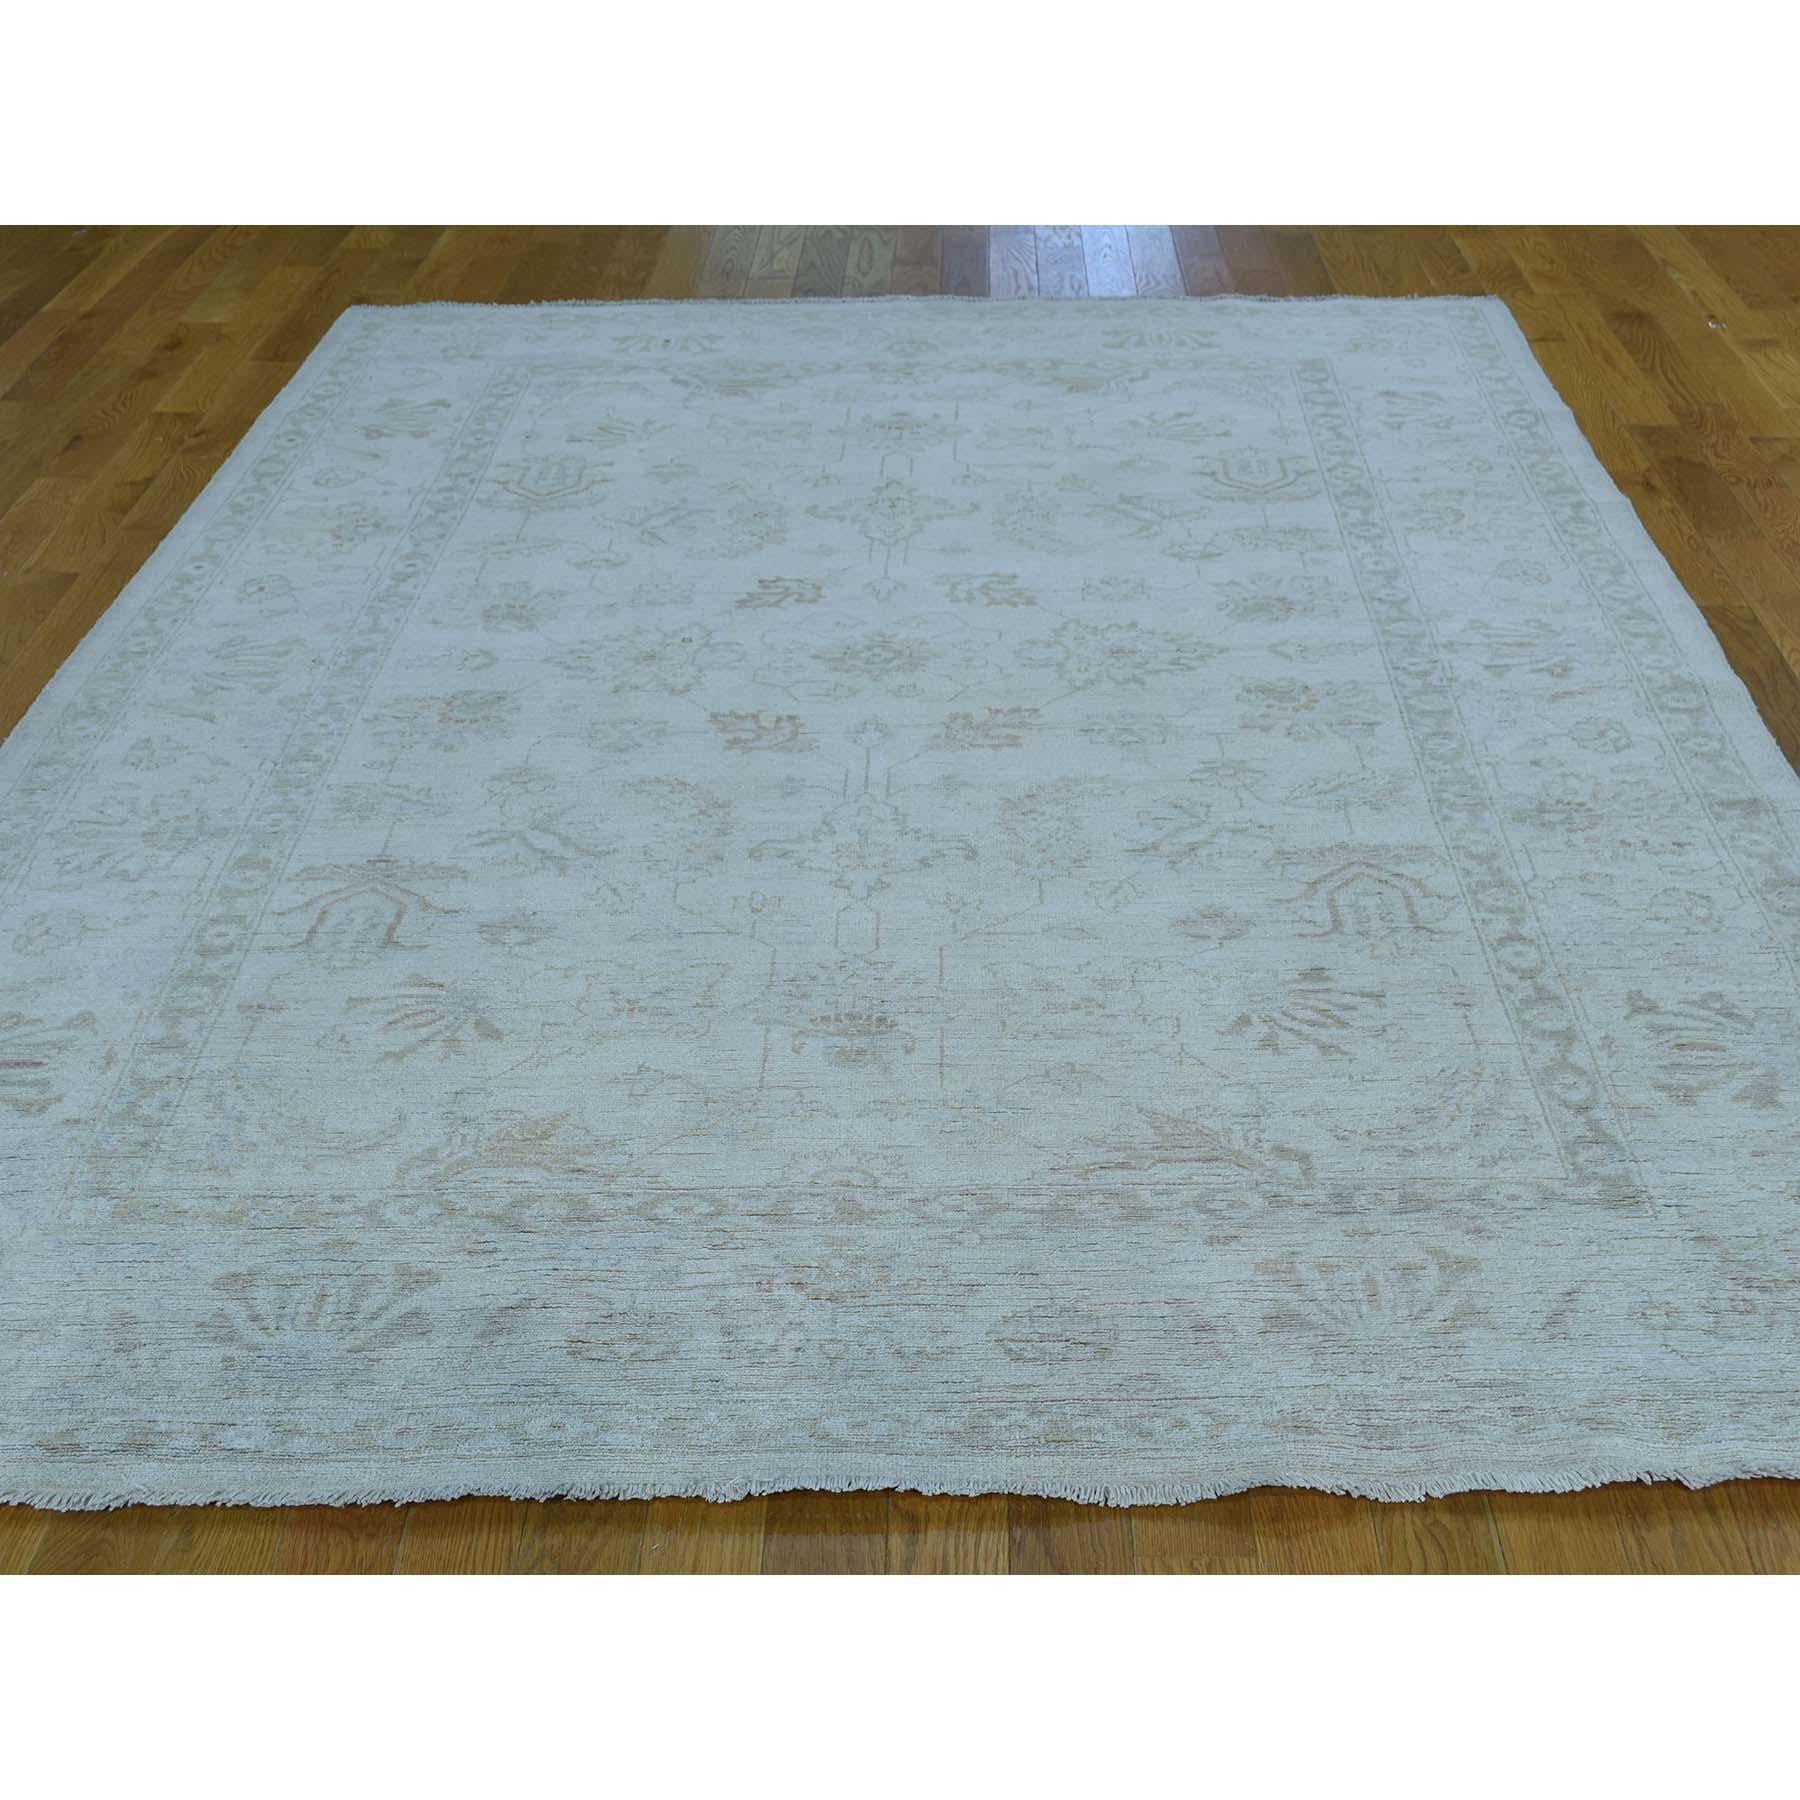 This is a truly genuine one-of-a-kind white wash Peshawar hand knotted pure wool Oriental rug. It has been knotted for months and months in the centuries-old Persian weaving craftsmanship techniques by expert artisans. Measures: 6'4